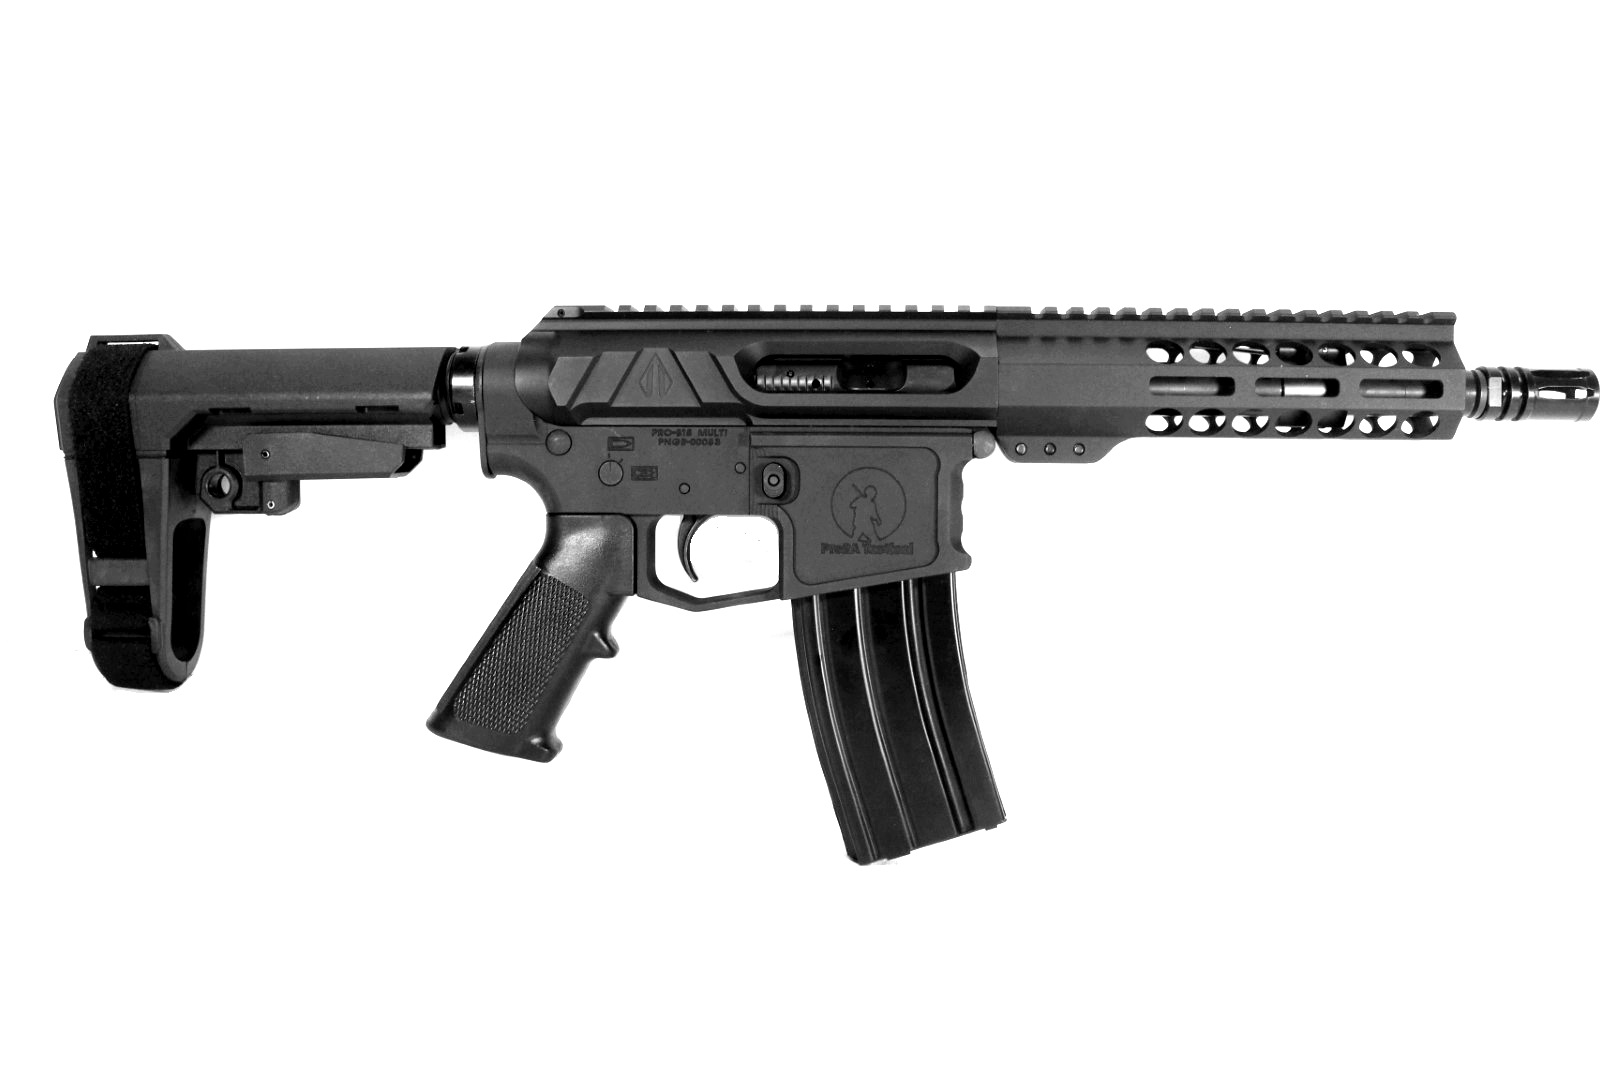 8 inch 5.56 NATO AR-15 Pistol | Side Charging | Made in the USA